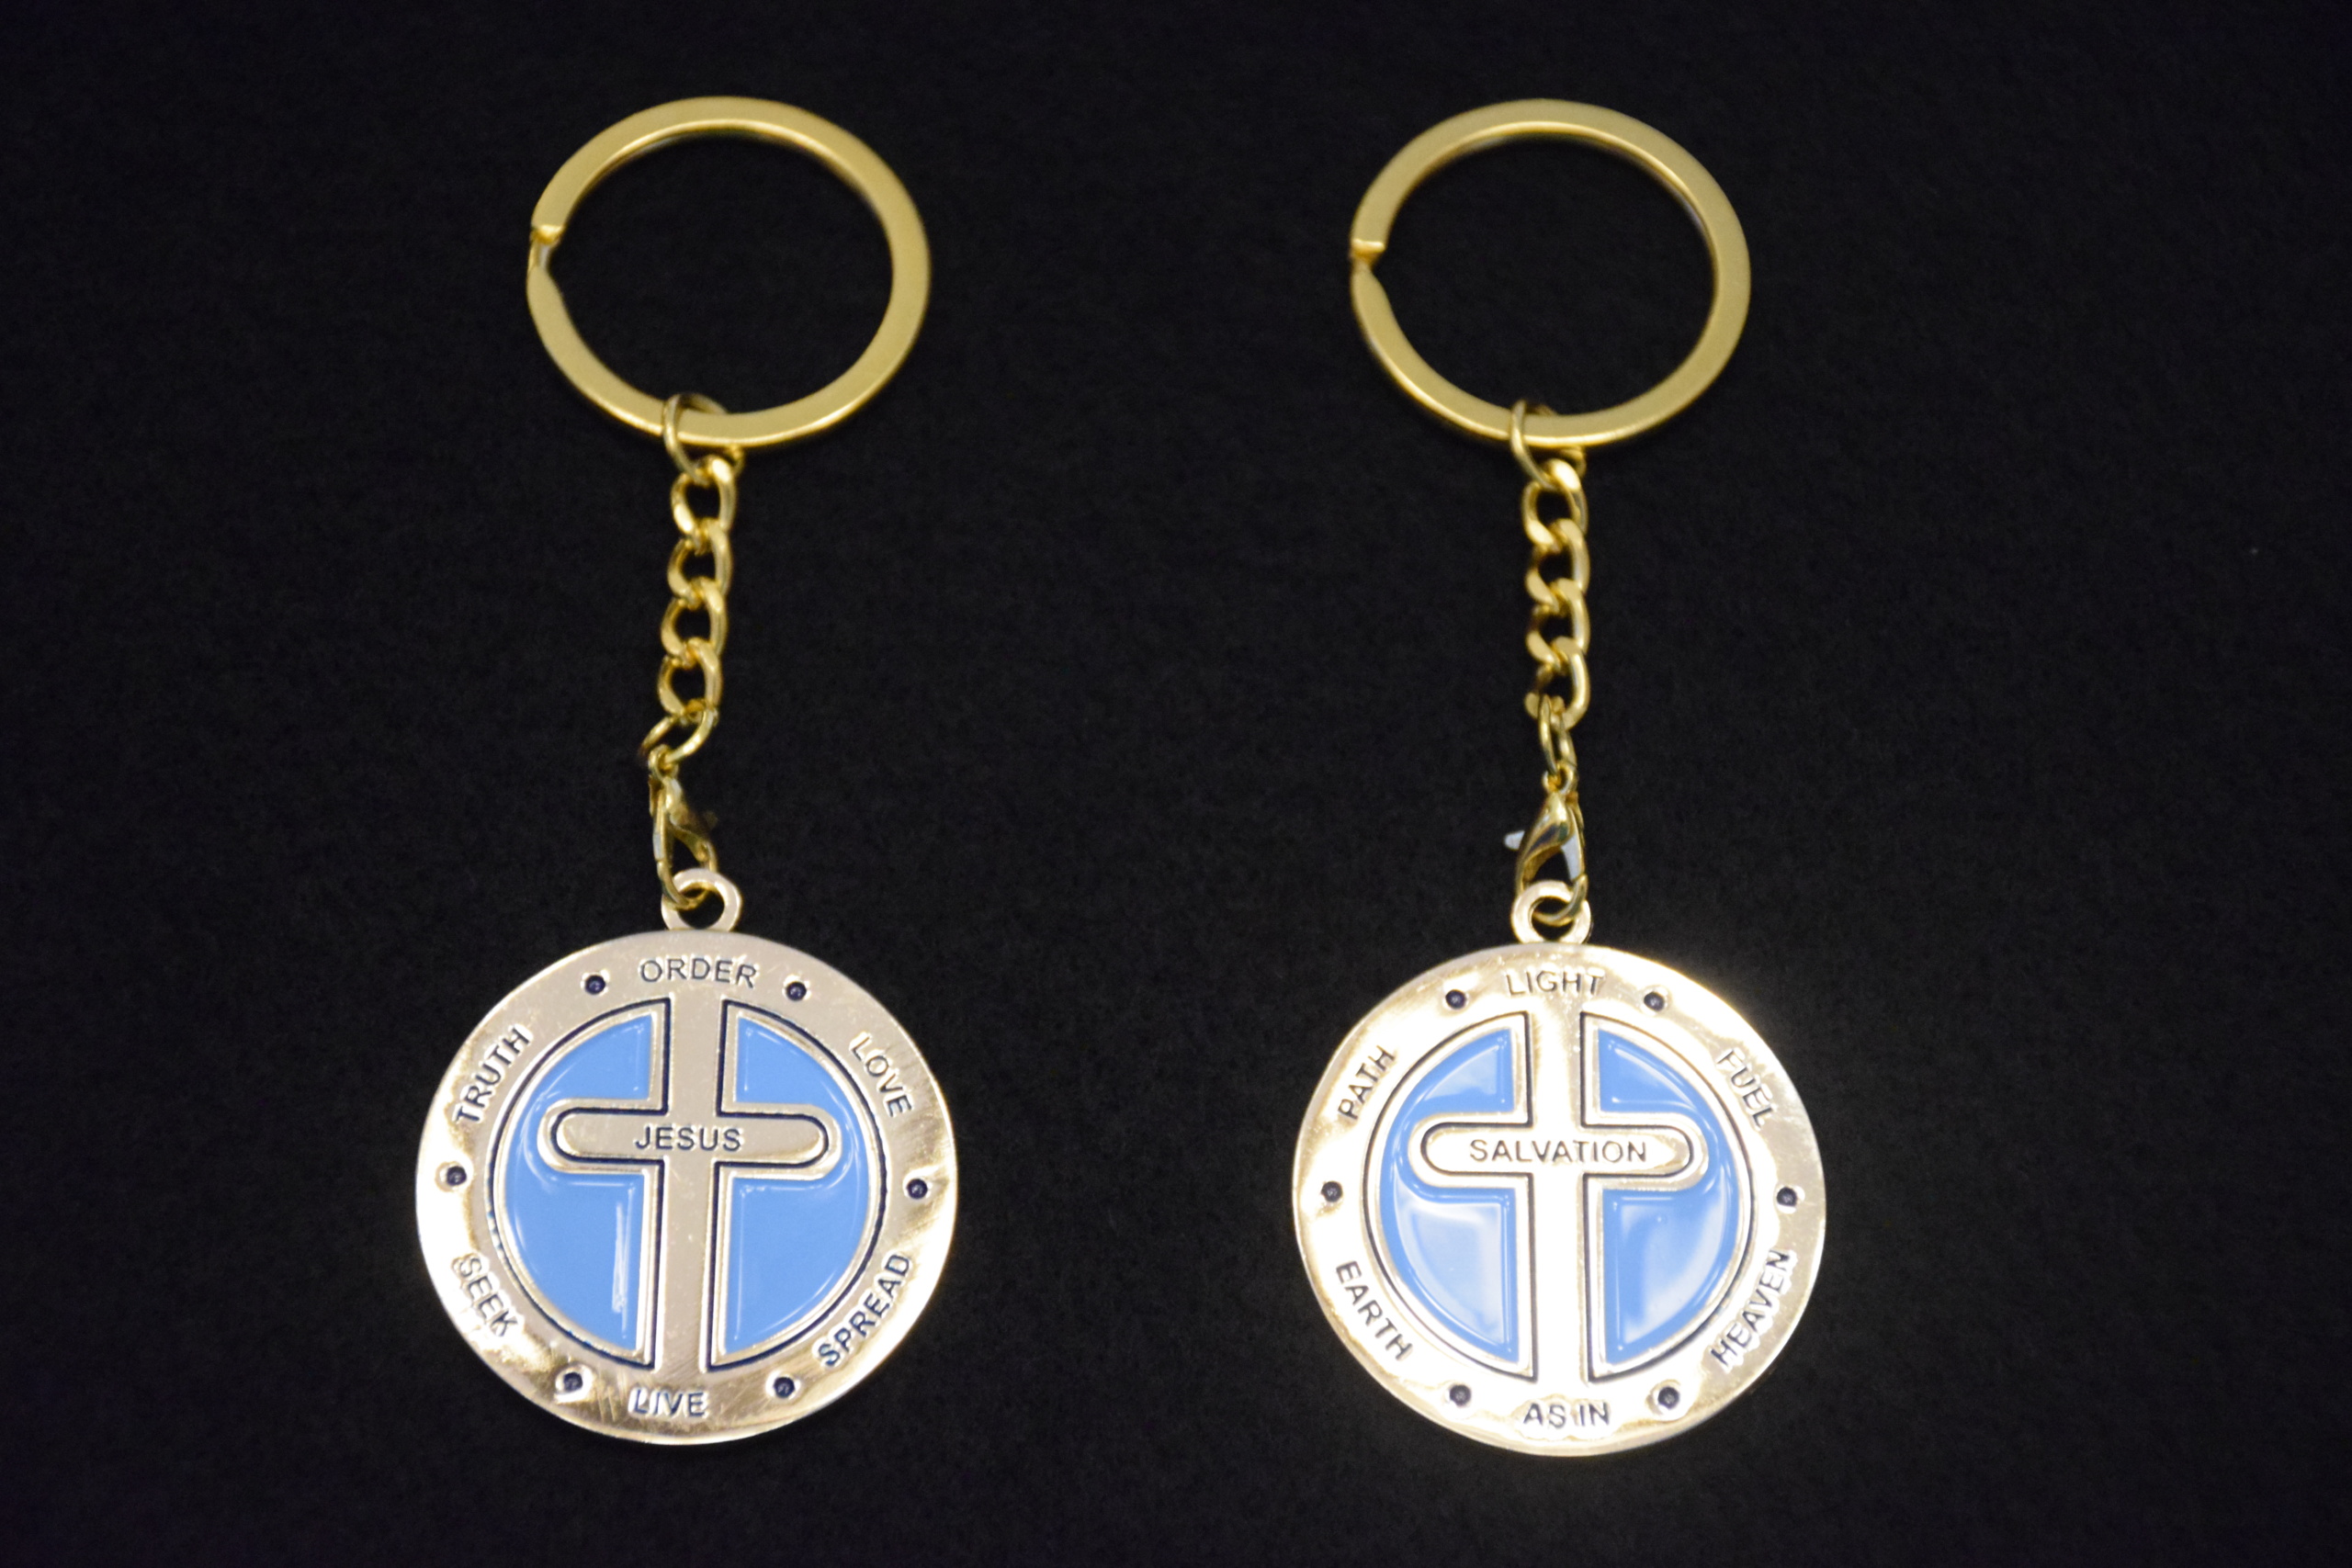 Two key chains with a cross on them.